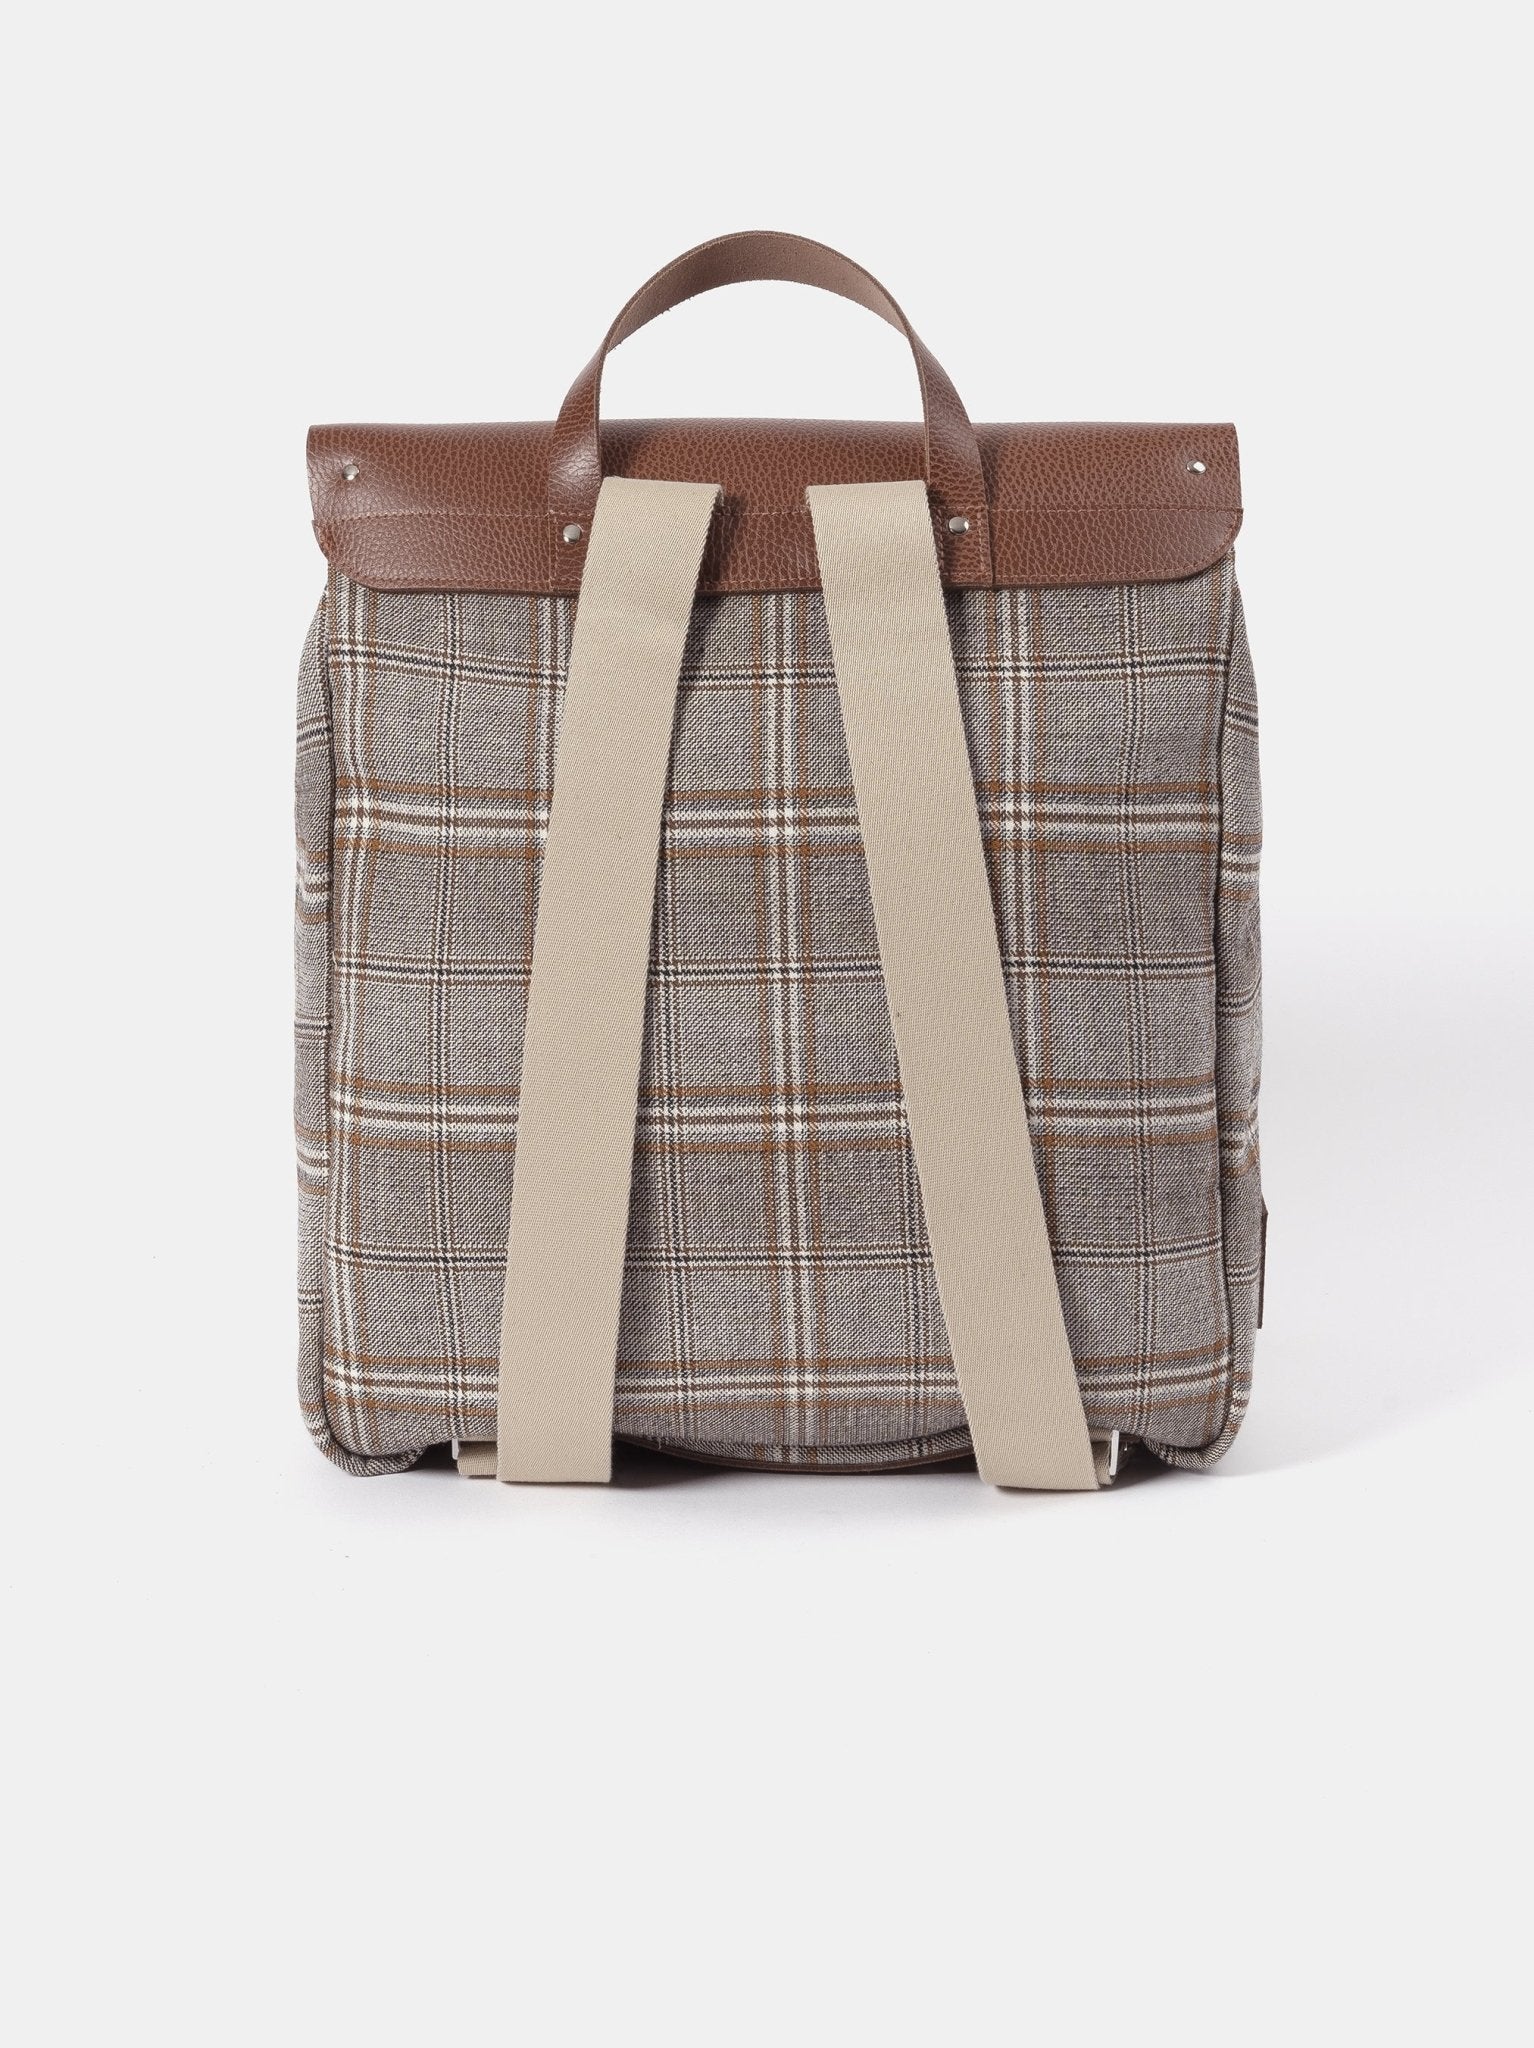 The Steamer Backpack - Bay Celtic Grain & Gloverall Grey Check - The Cambridge Satchel Company US Store